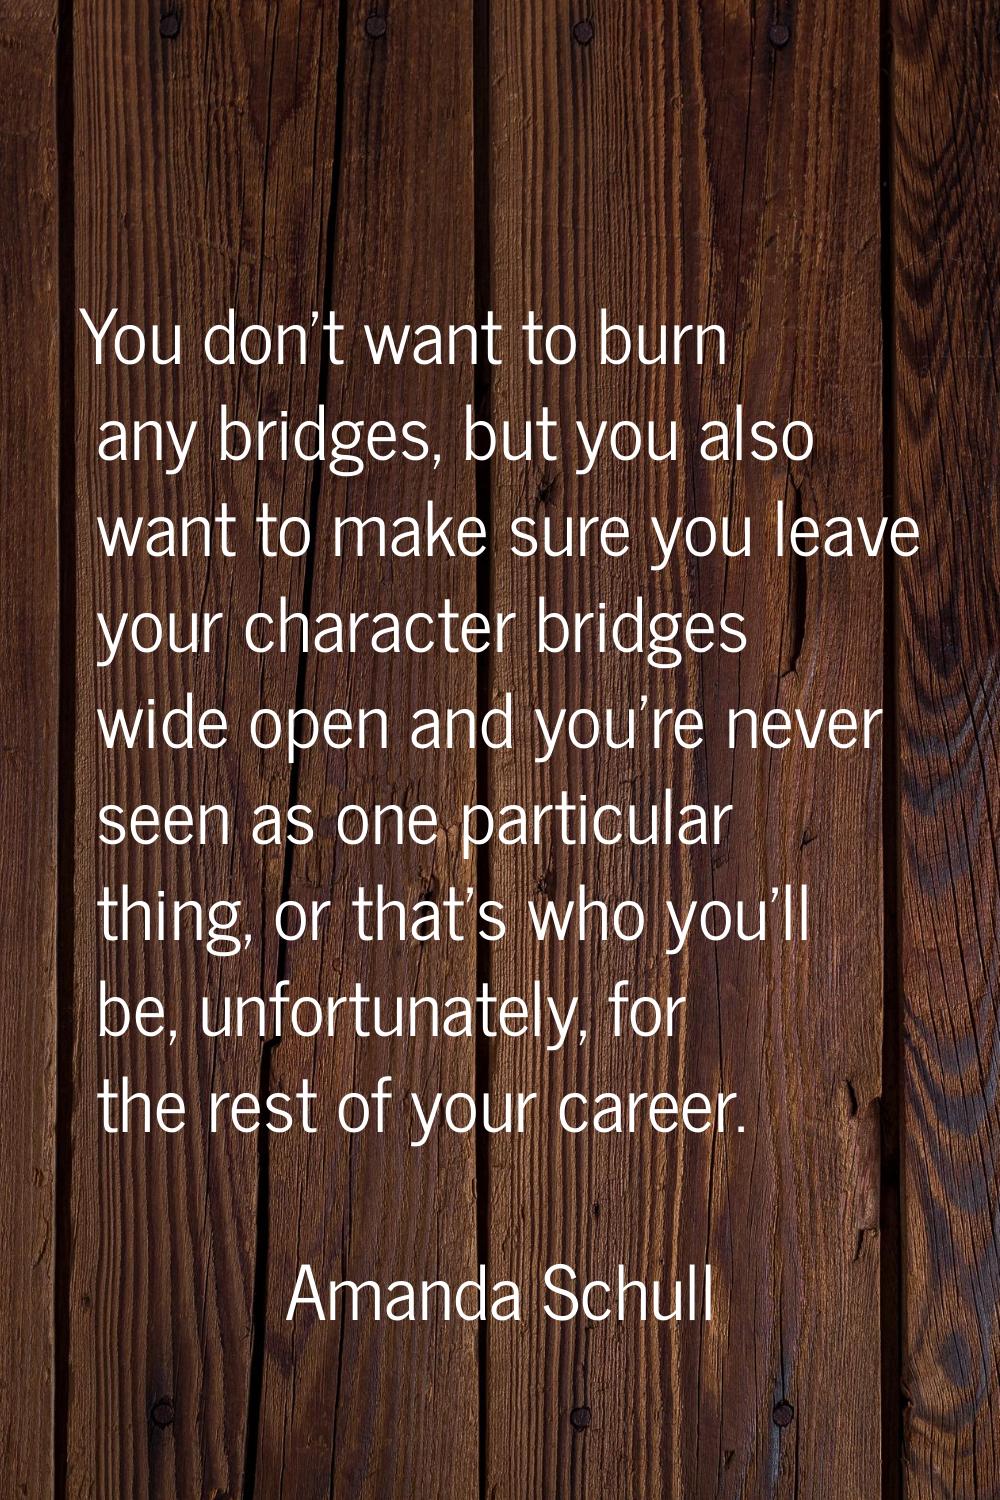 You don't want to burn any bridges, but you also want to make sure you leave your character bridges